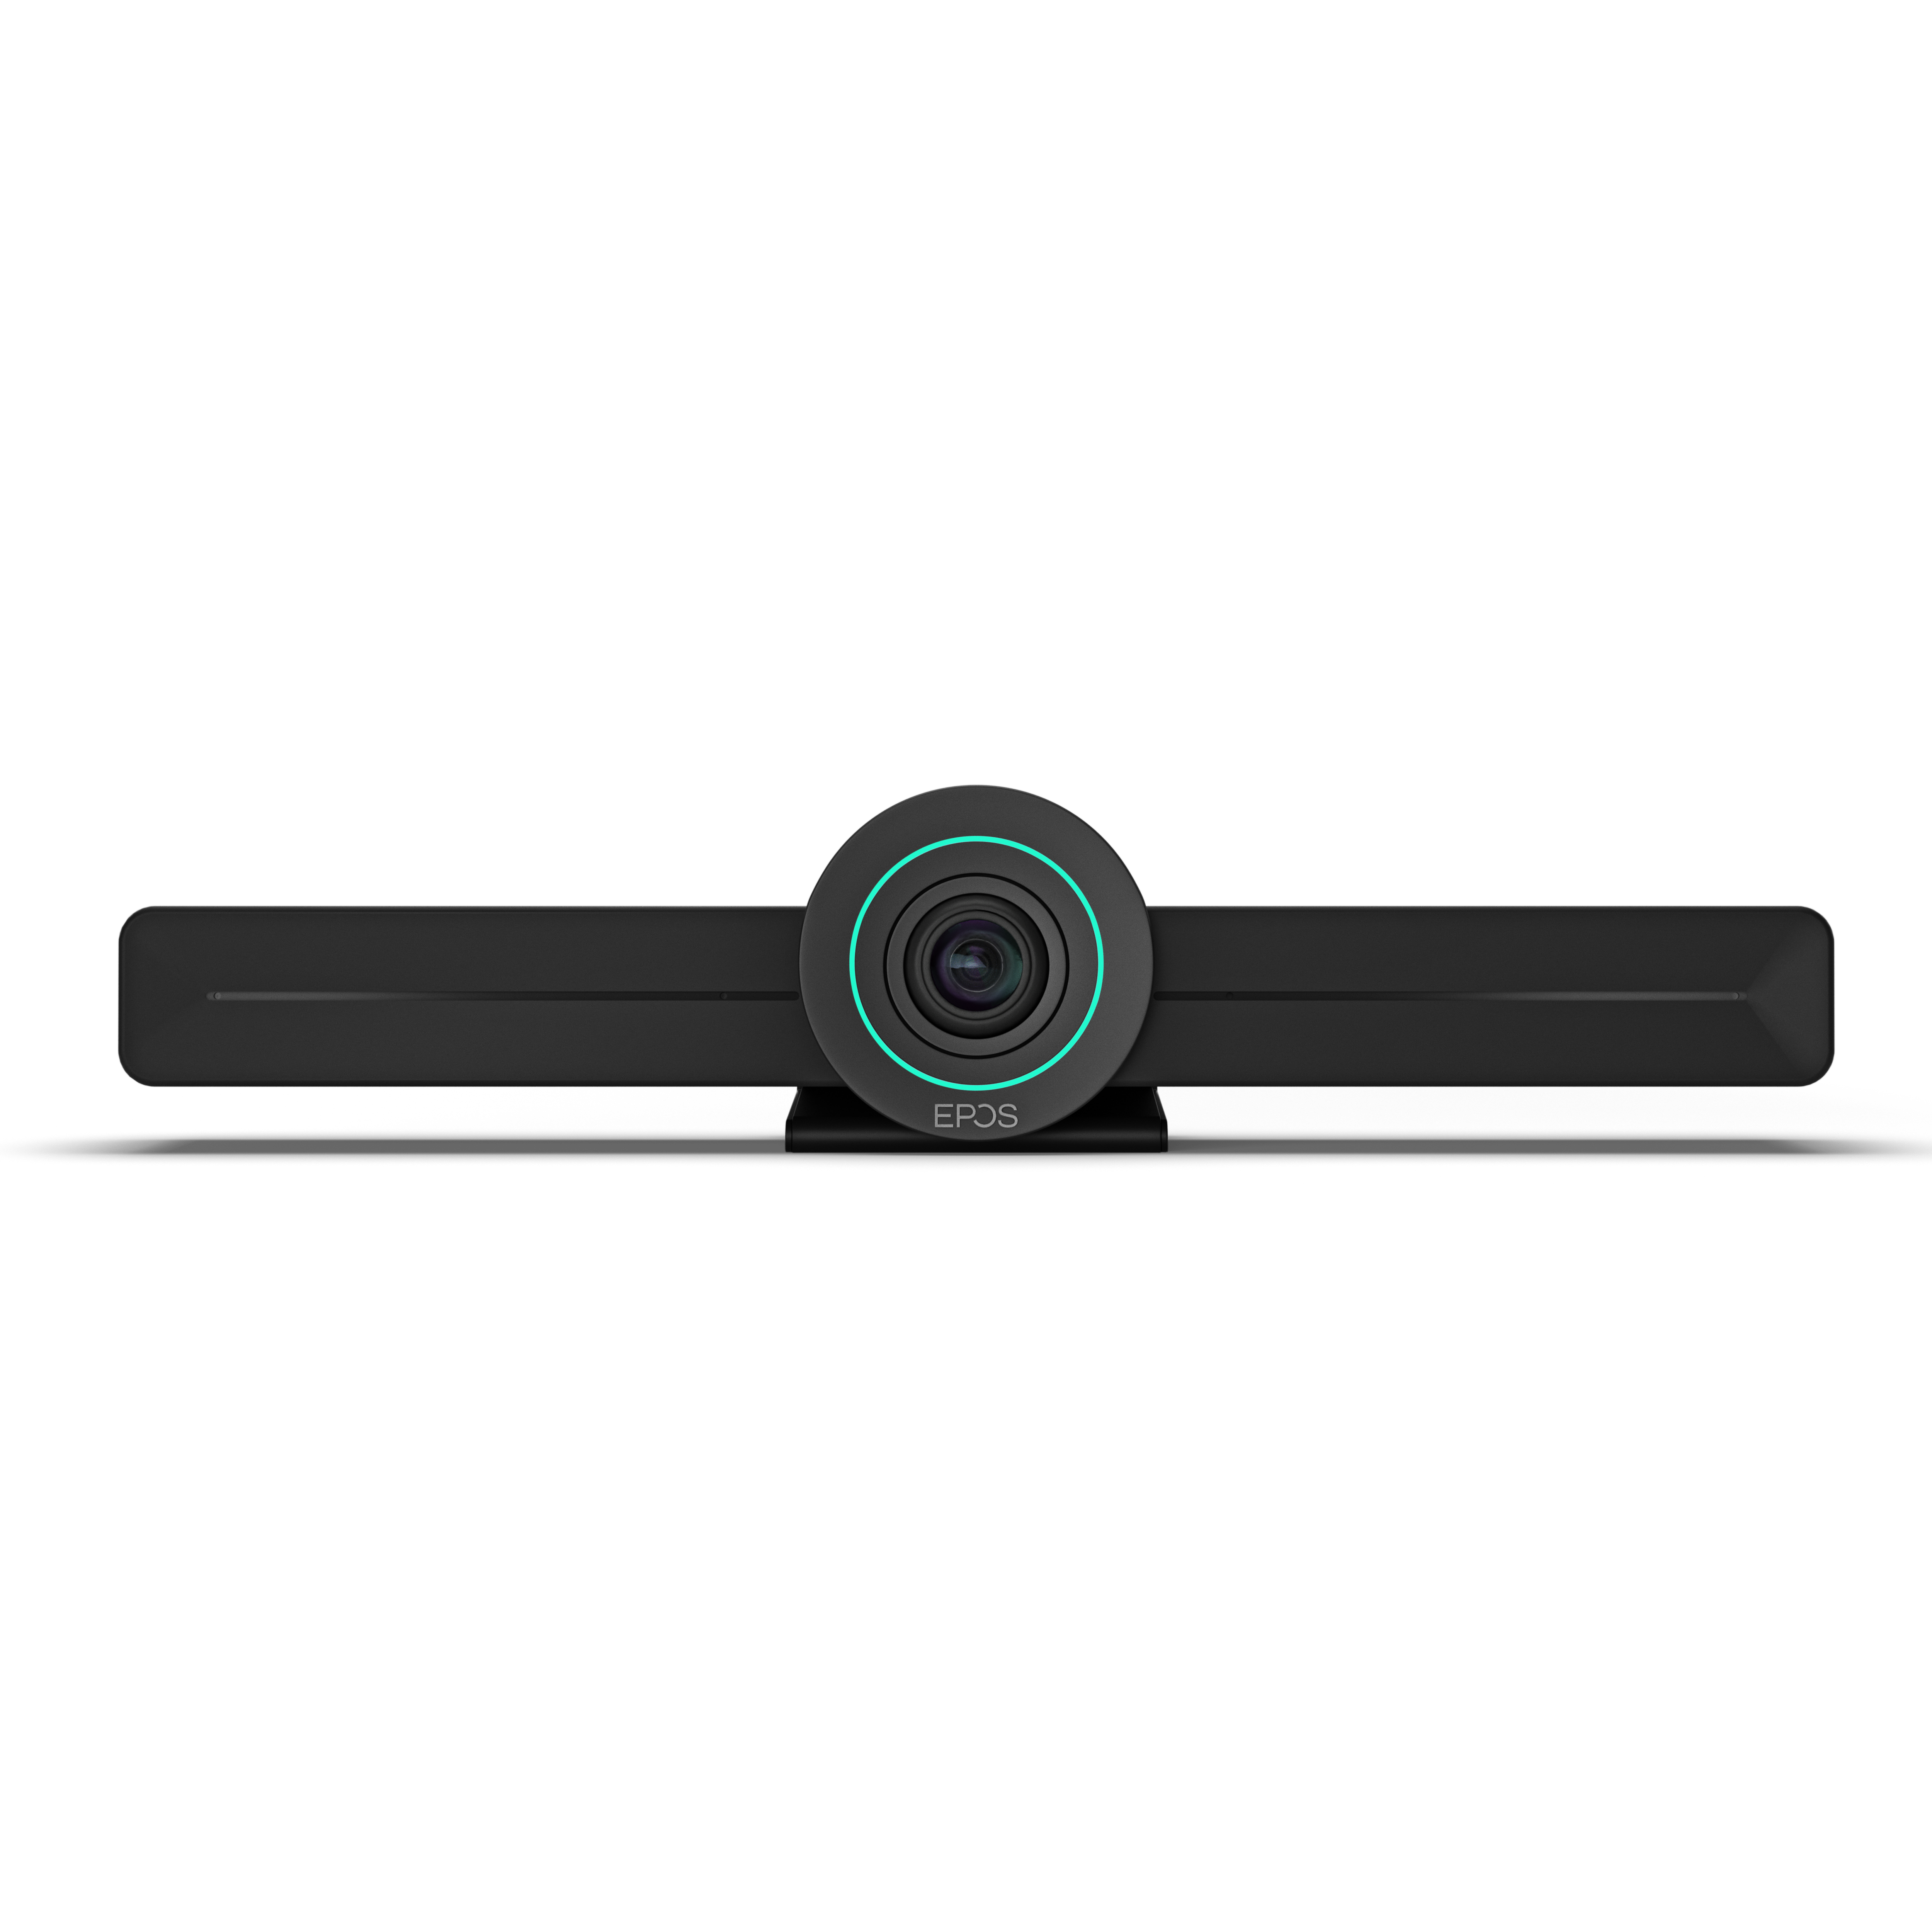 EPOS / Sennheiser EXPAND VISION 3T, All-in-one video collaboration solution for Microsoft Teams